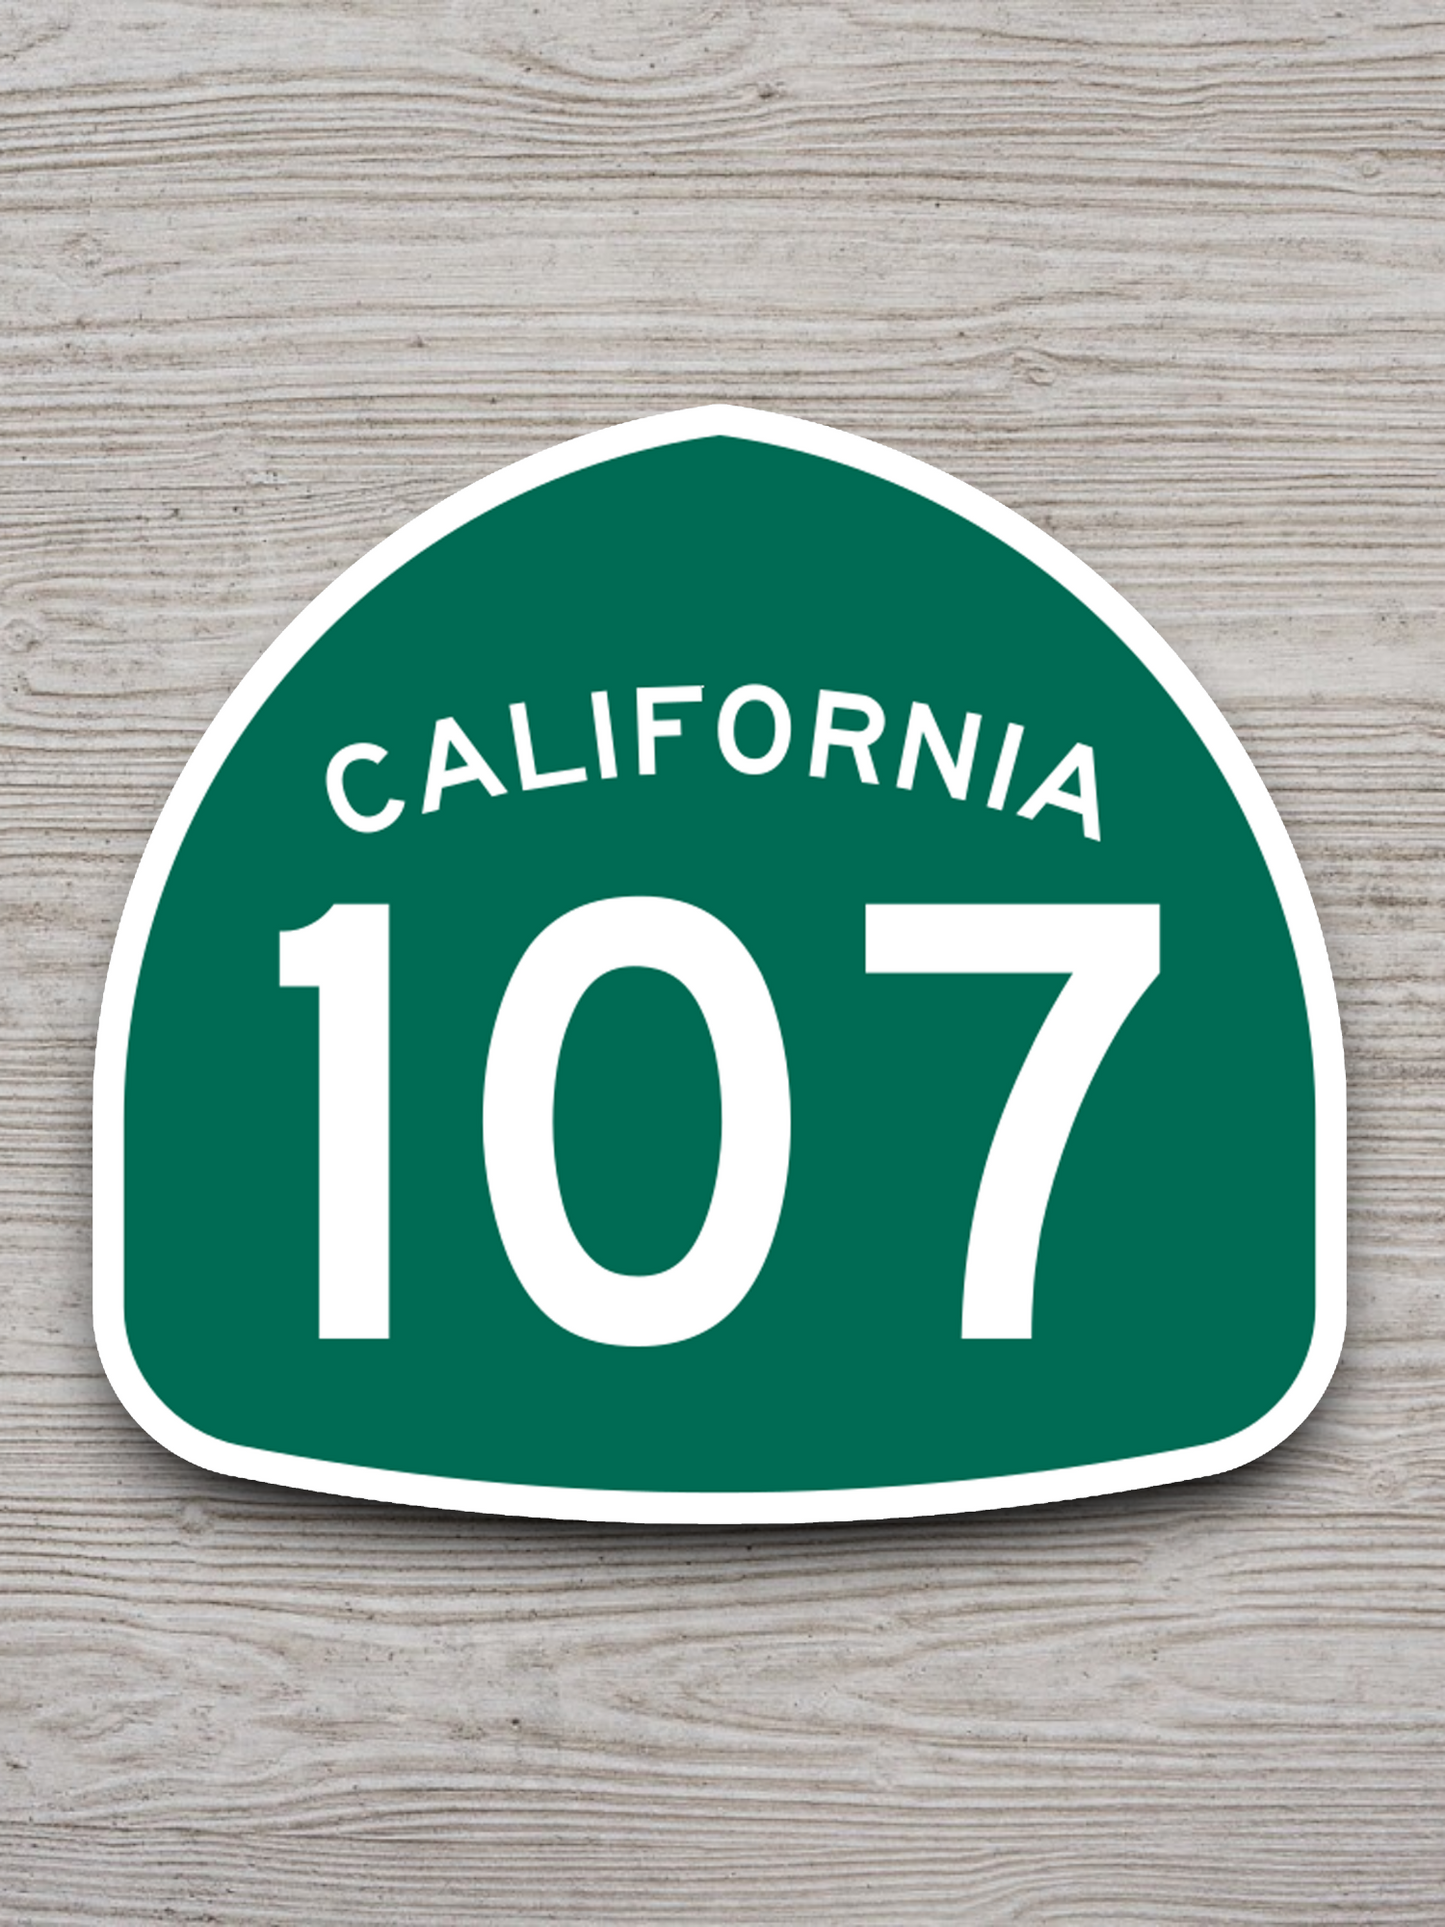 California State Route 107 Road Sign Sticker